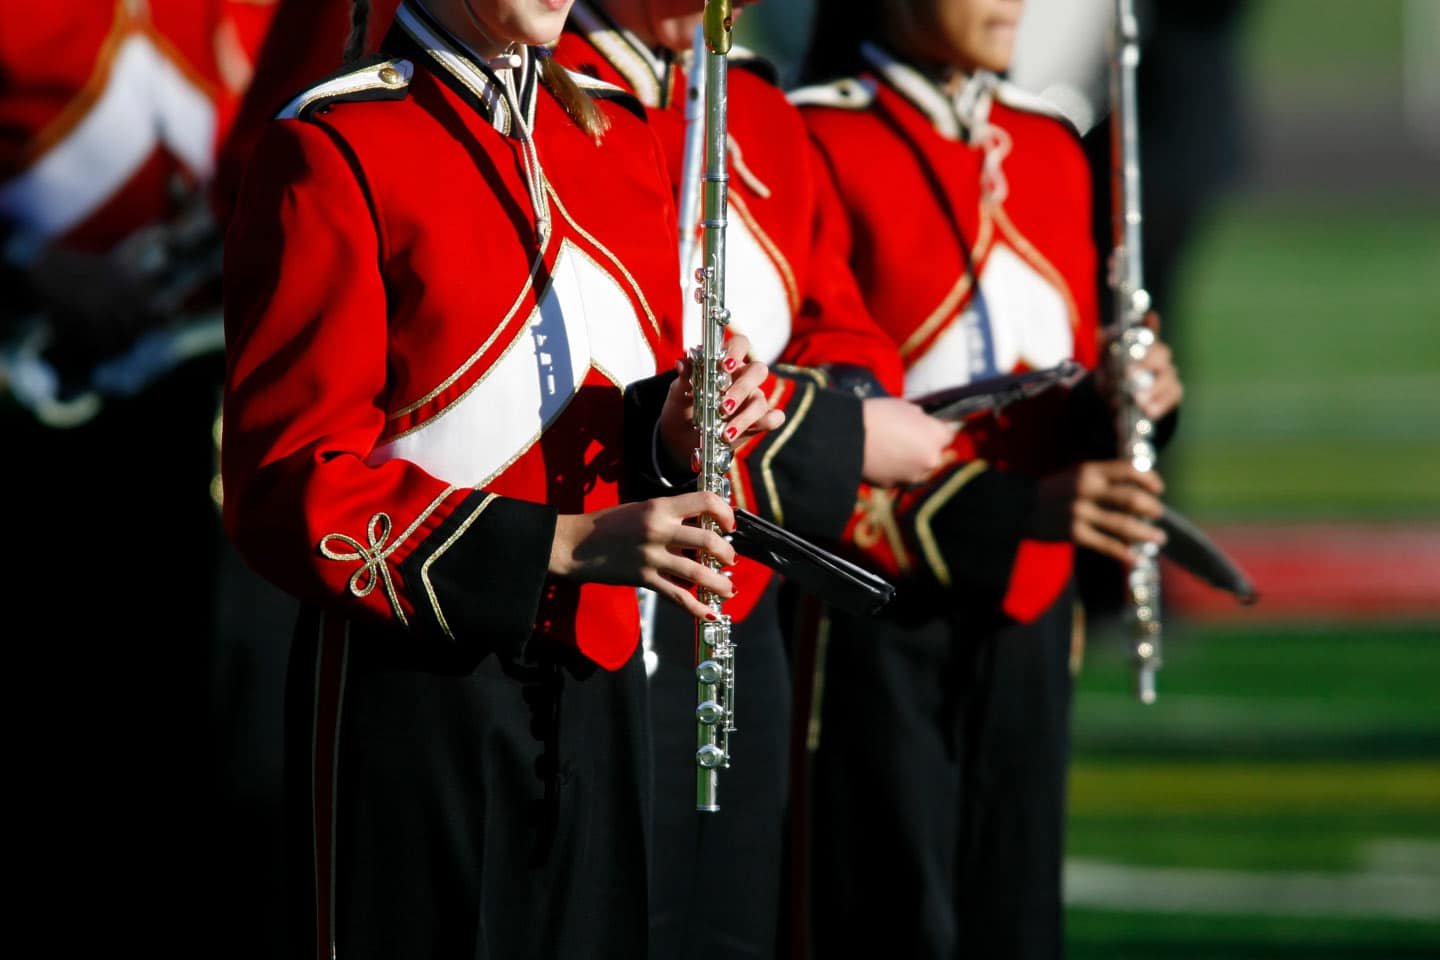 Members of a high school marching band holding instruments